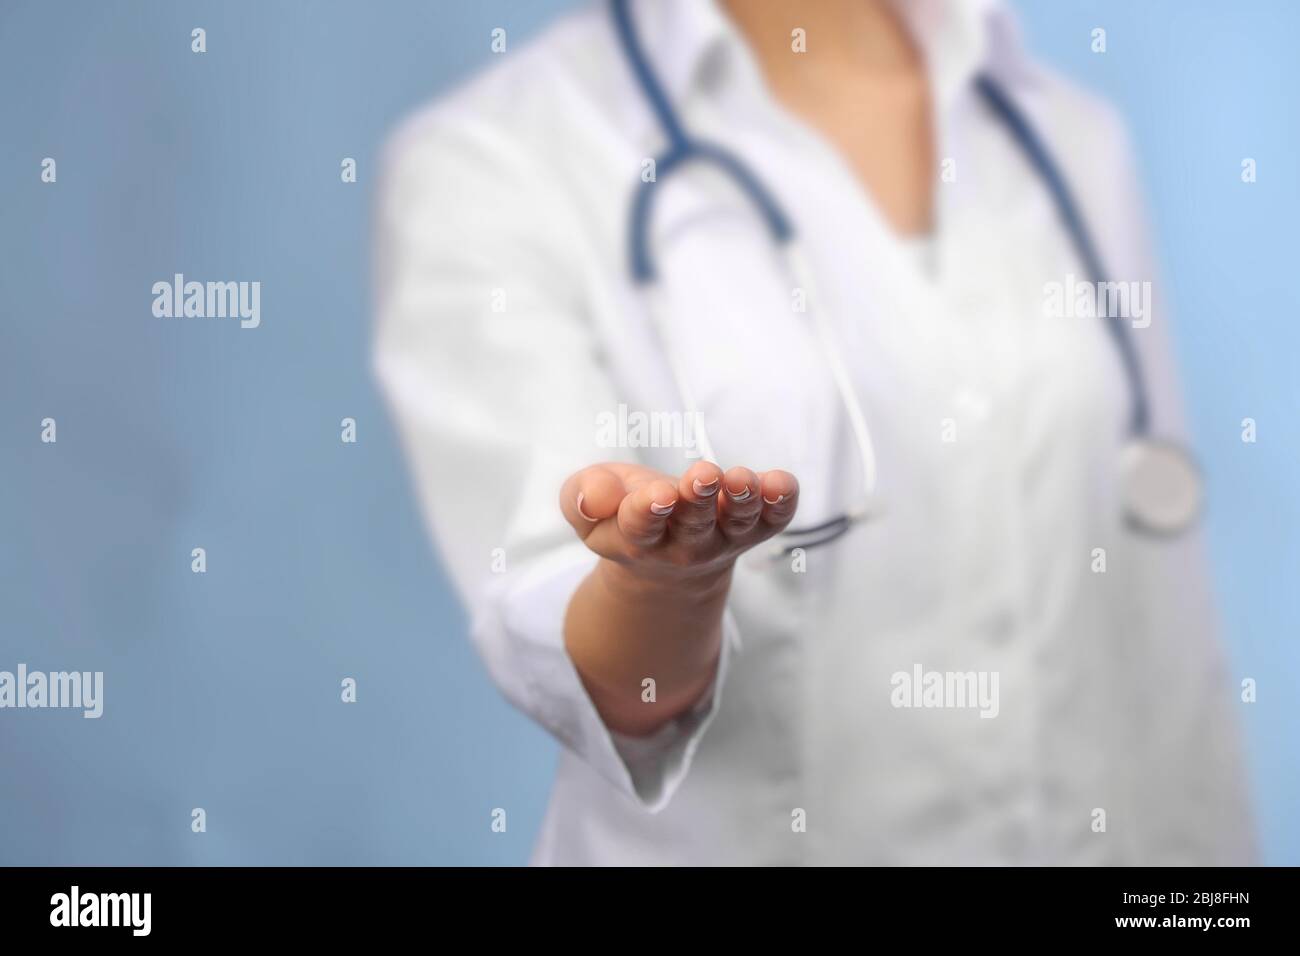 Young female doctor with outstretched hand and stethoscope Stock Photo